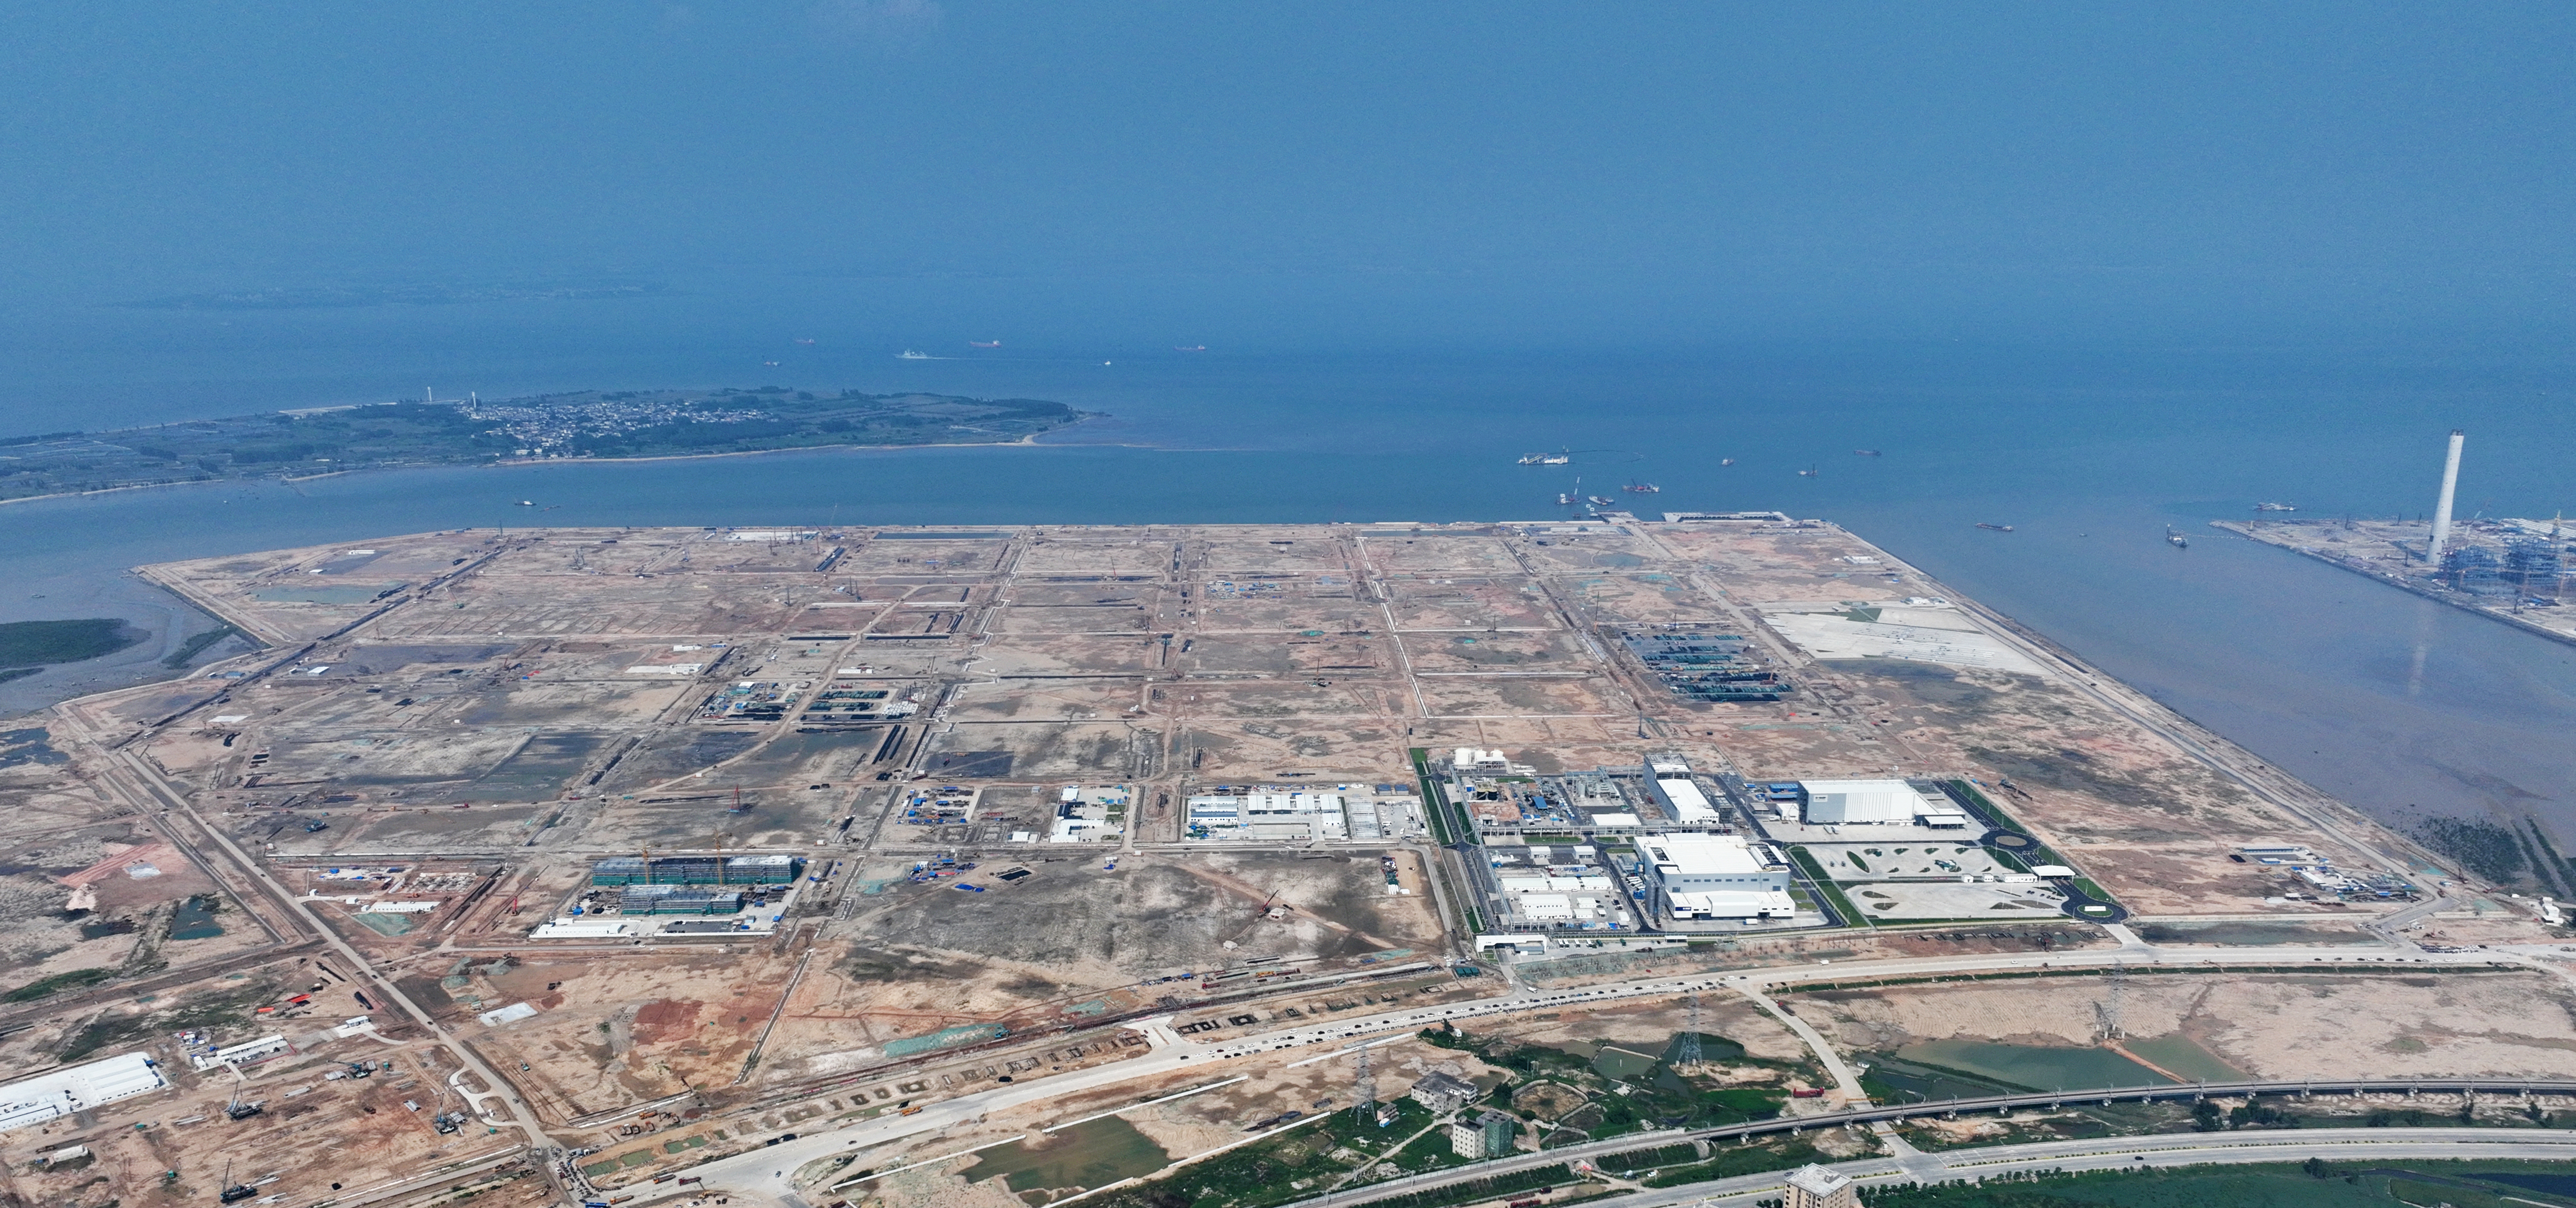 BASF to build Neopentyl Glycol plant at Zhanjiang Verbund site in China